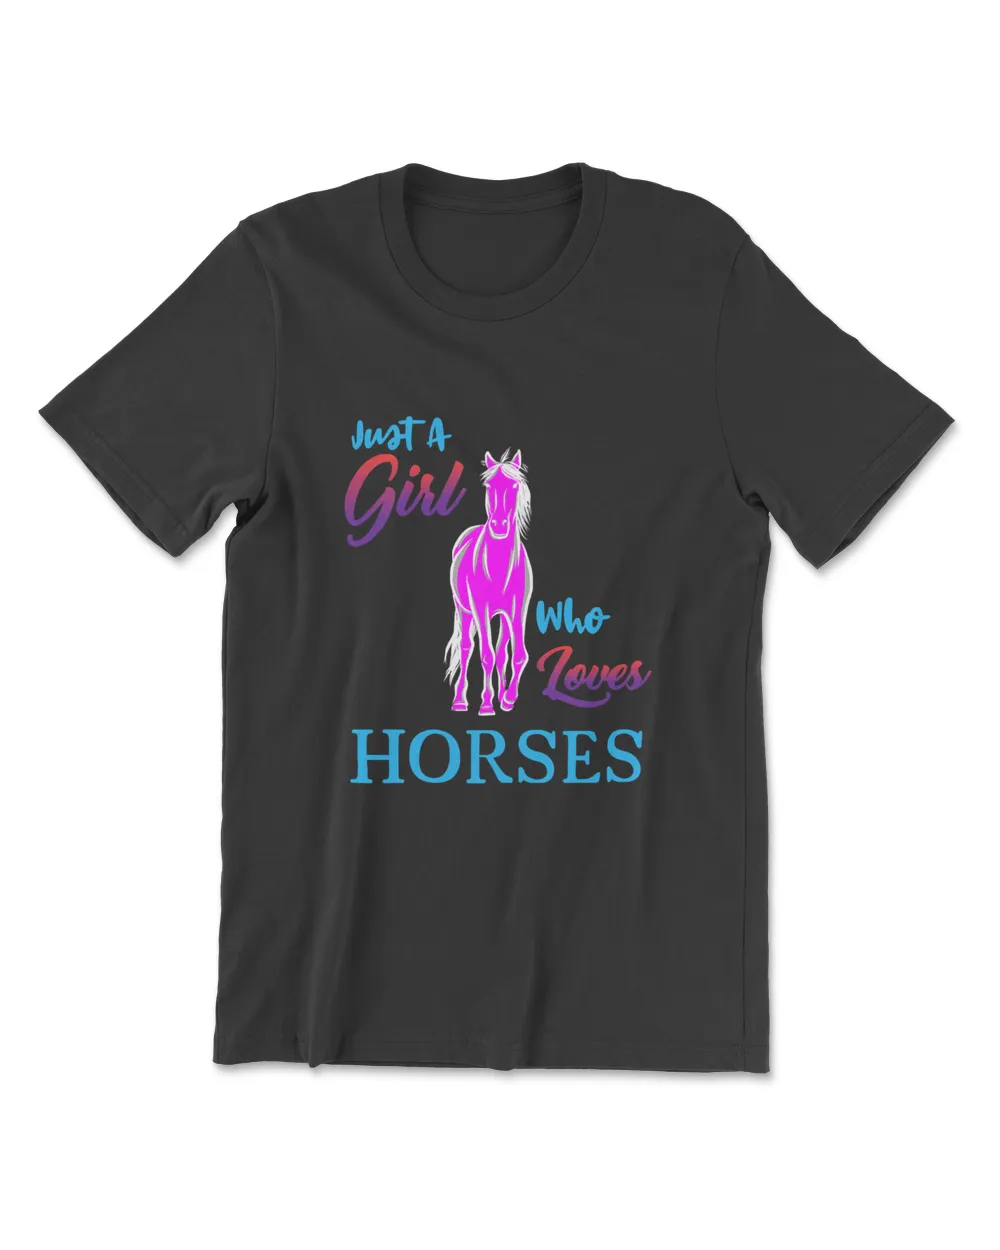 Just A Girl Who Loves Horses - Cute Horse T-Shirt